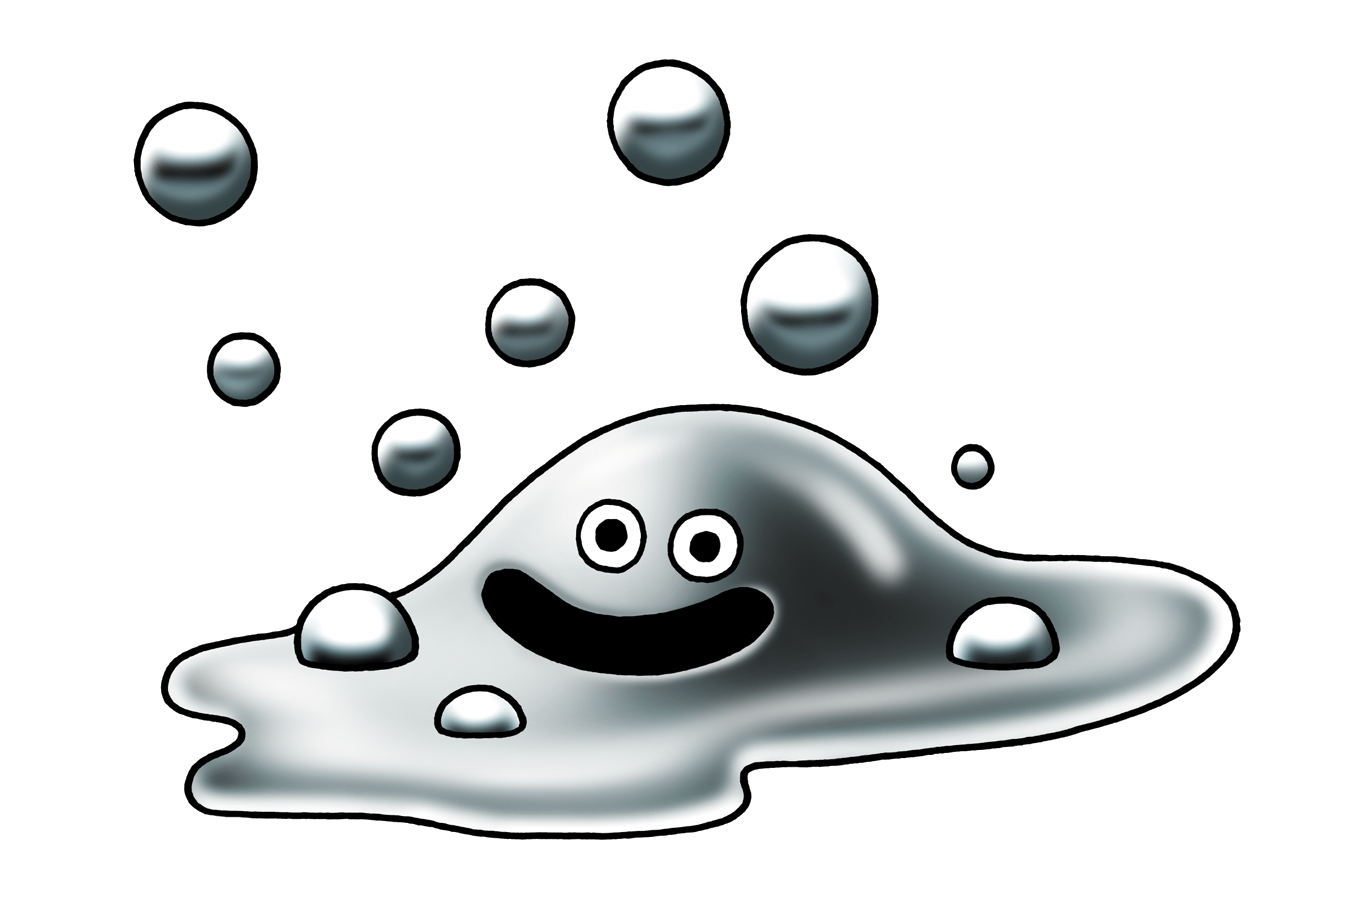 Dragon Quest Monsters: The Dark Prince Metal Slime, Where to Find